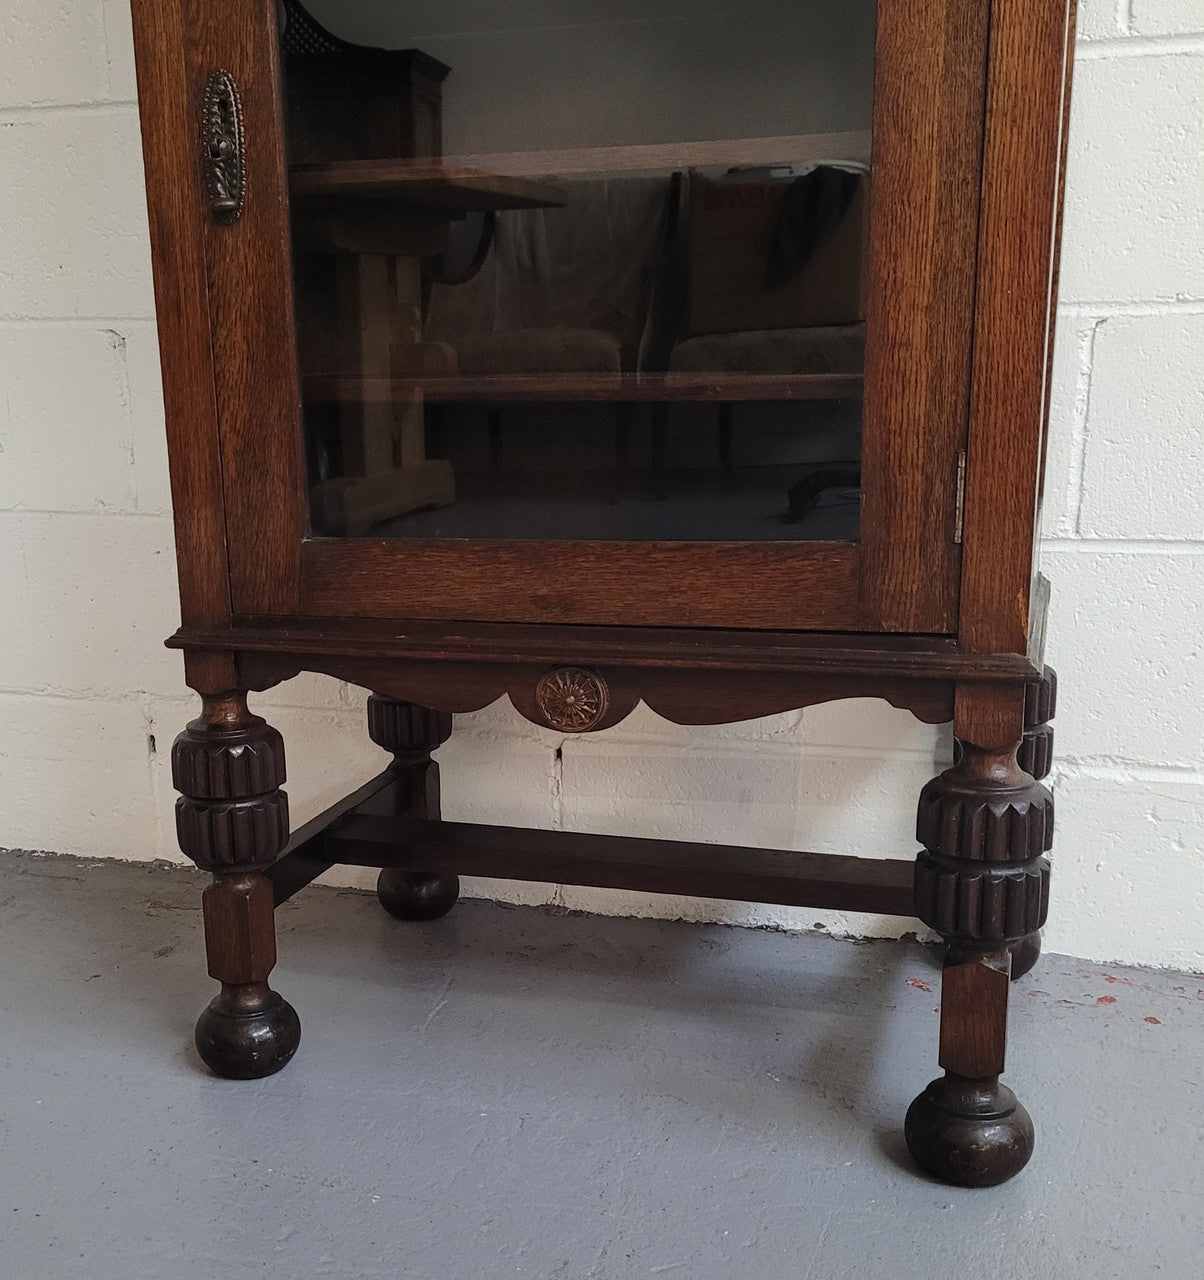 A very practical compact Oak Tudor style display cabinet with three fixed shelves. In good original detailed condition.